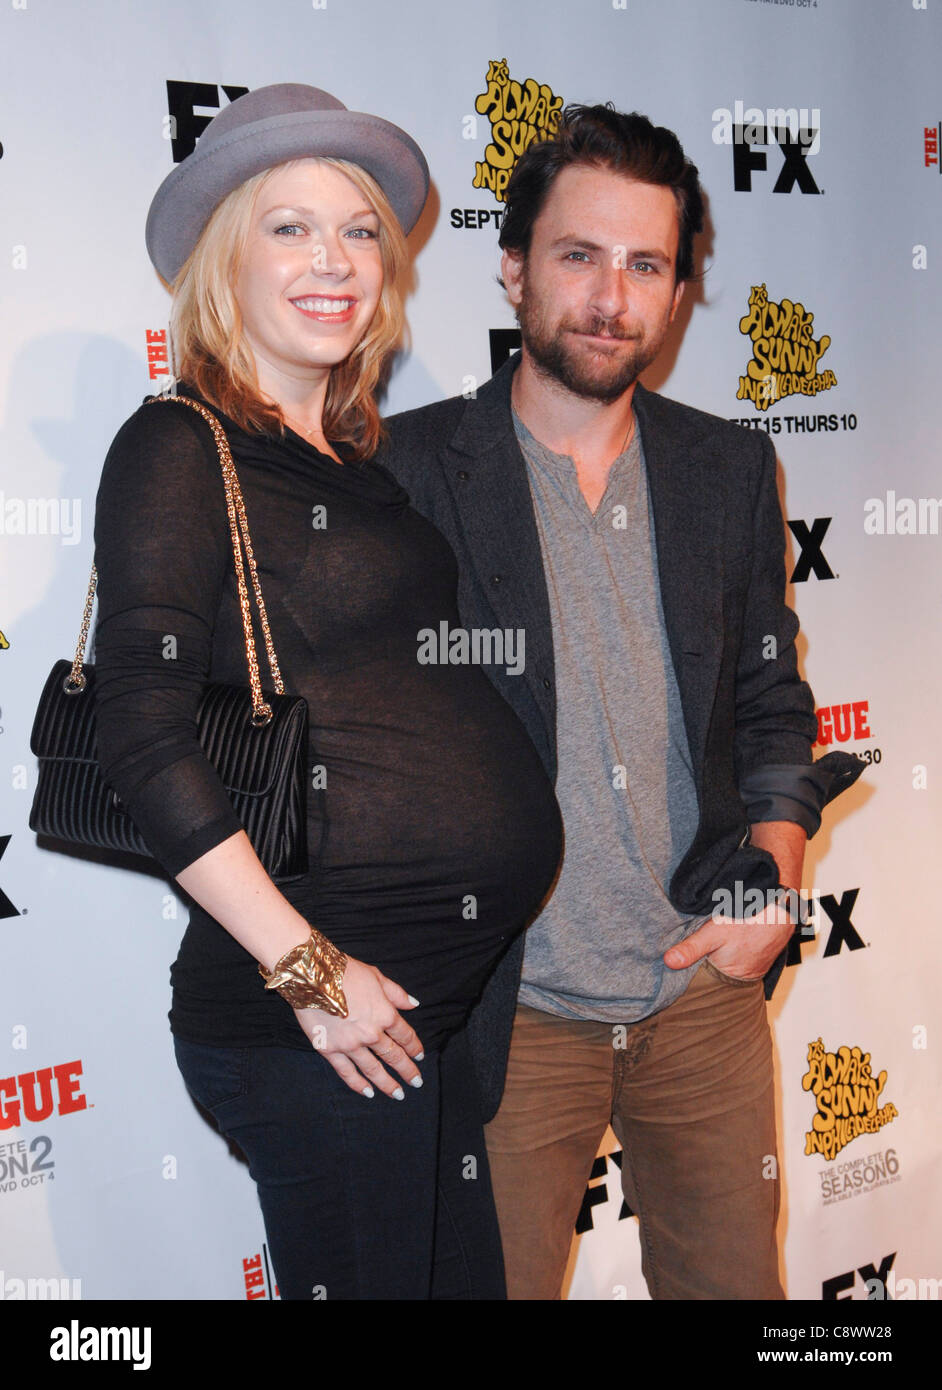 It's Always Sunny's Charlie Day and Mary Elizabeth Ellis Are Expecting